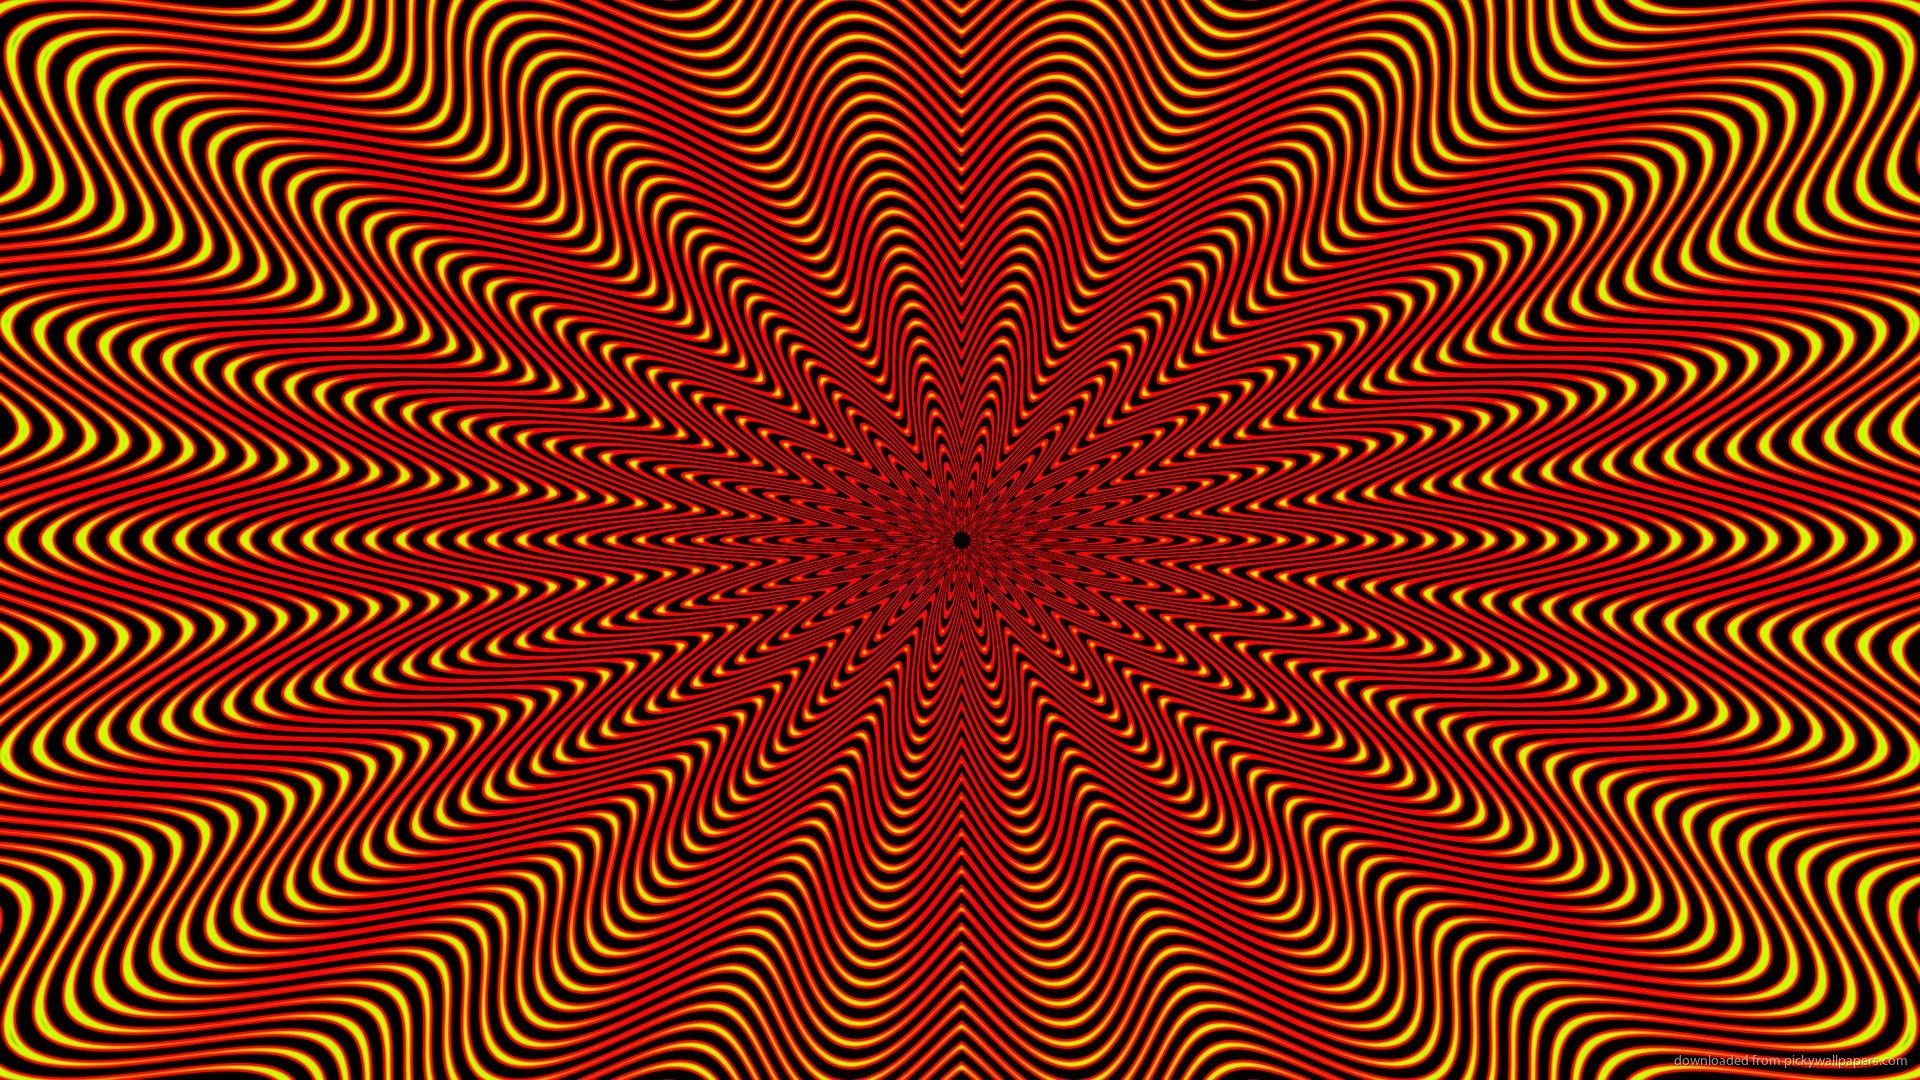 Optical Illusion (Other), Red illusions, Mind-bending artwork, Optical deception, 1920x1080 Full HD Desktop